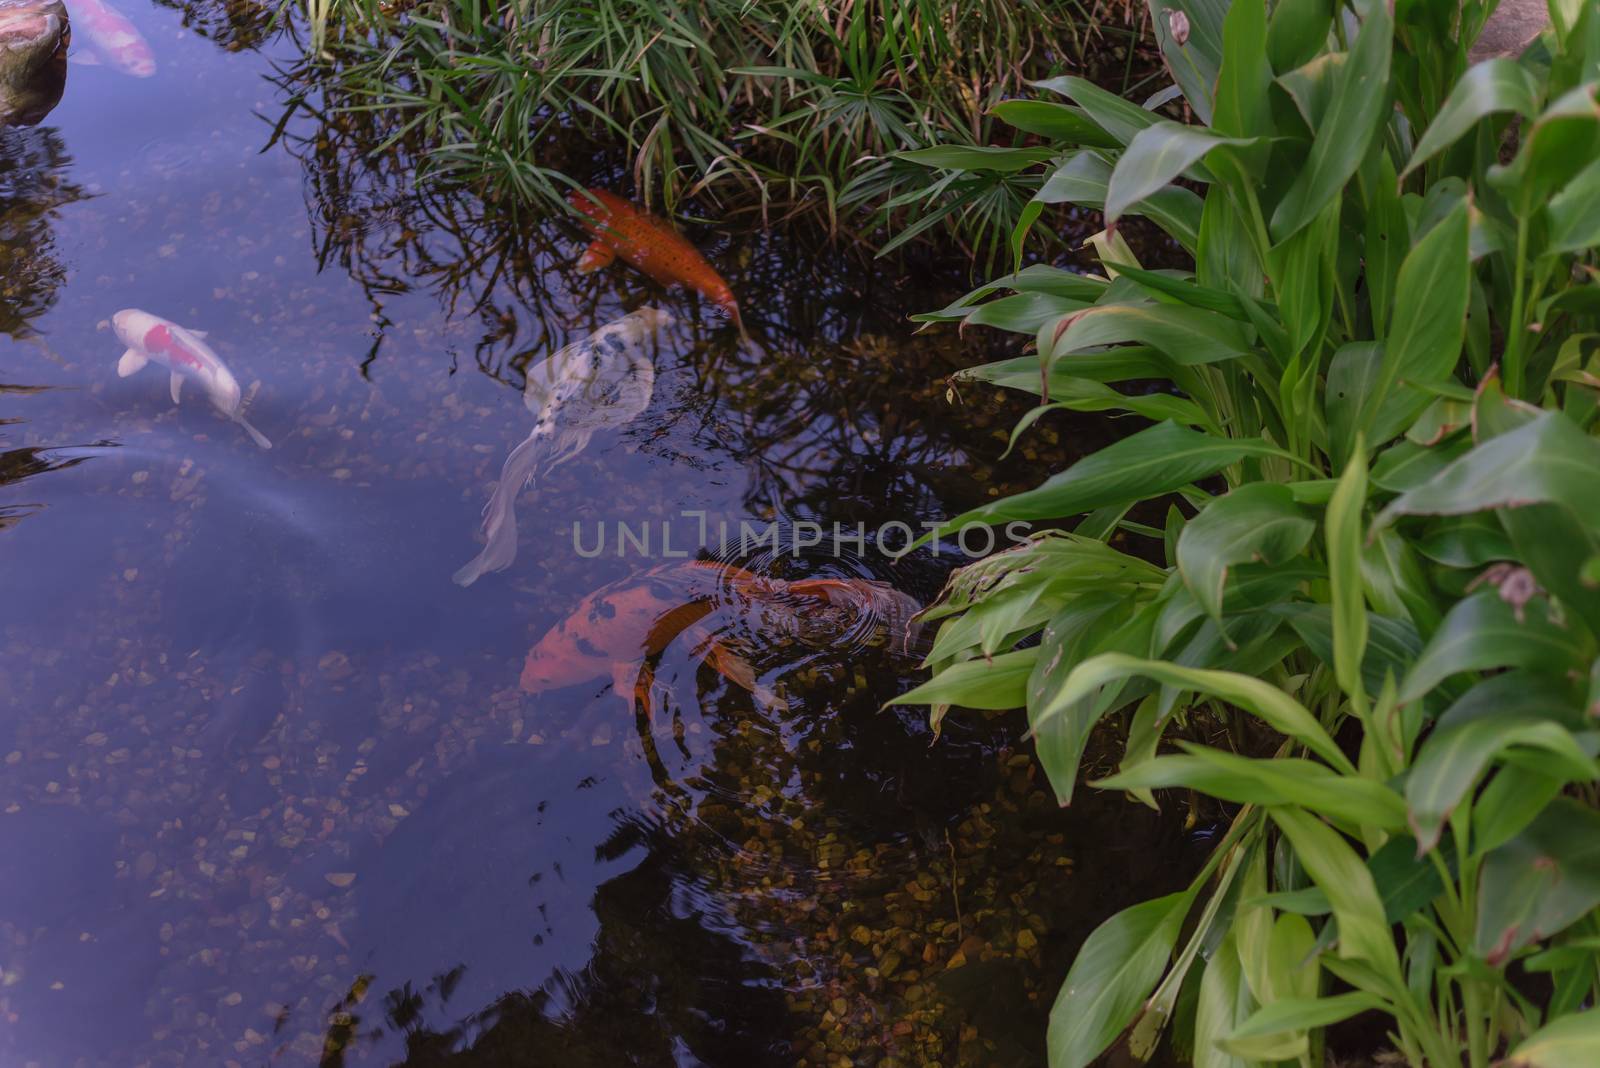 Tropical plant at water garden with colorful koi fishes swimming near Dallas, Texas, USA by trongnguyen